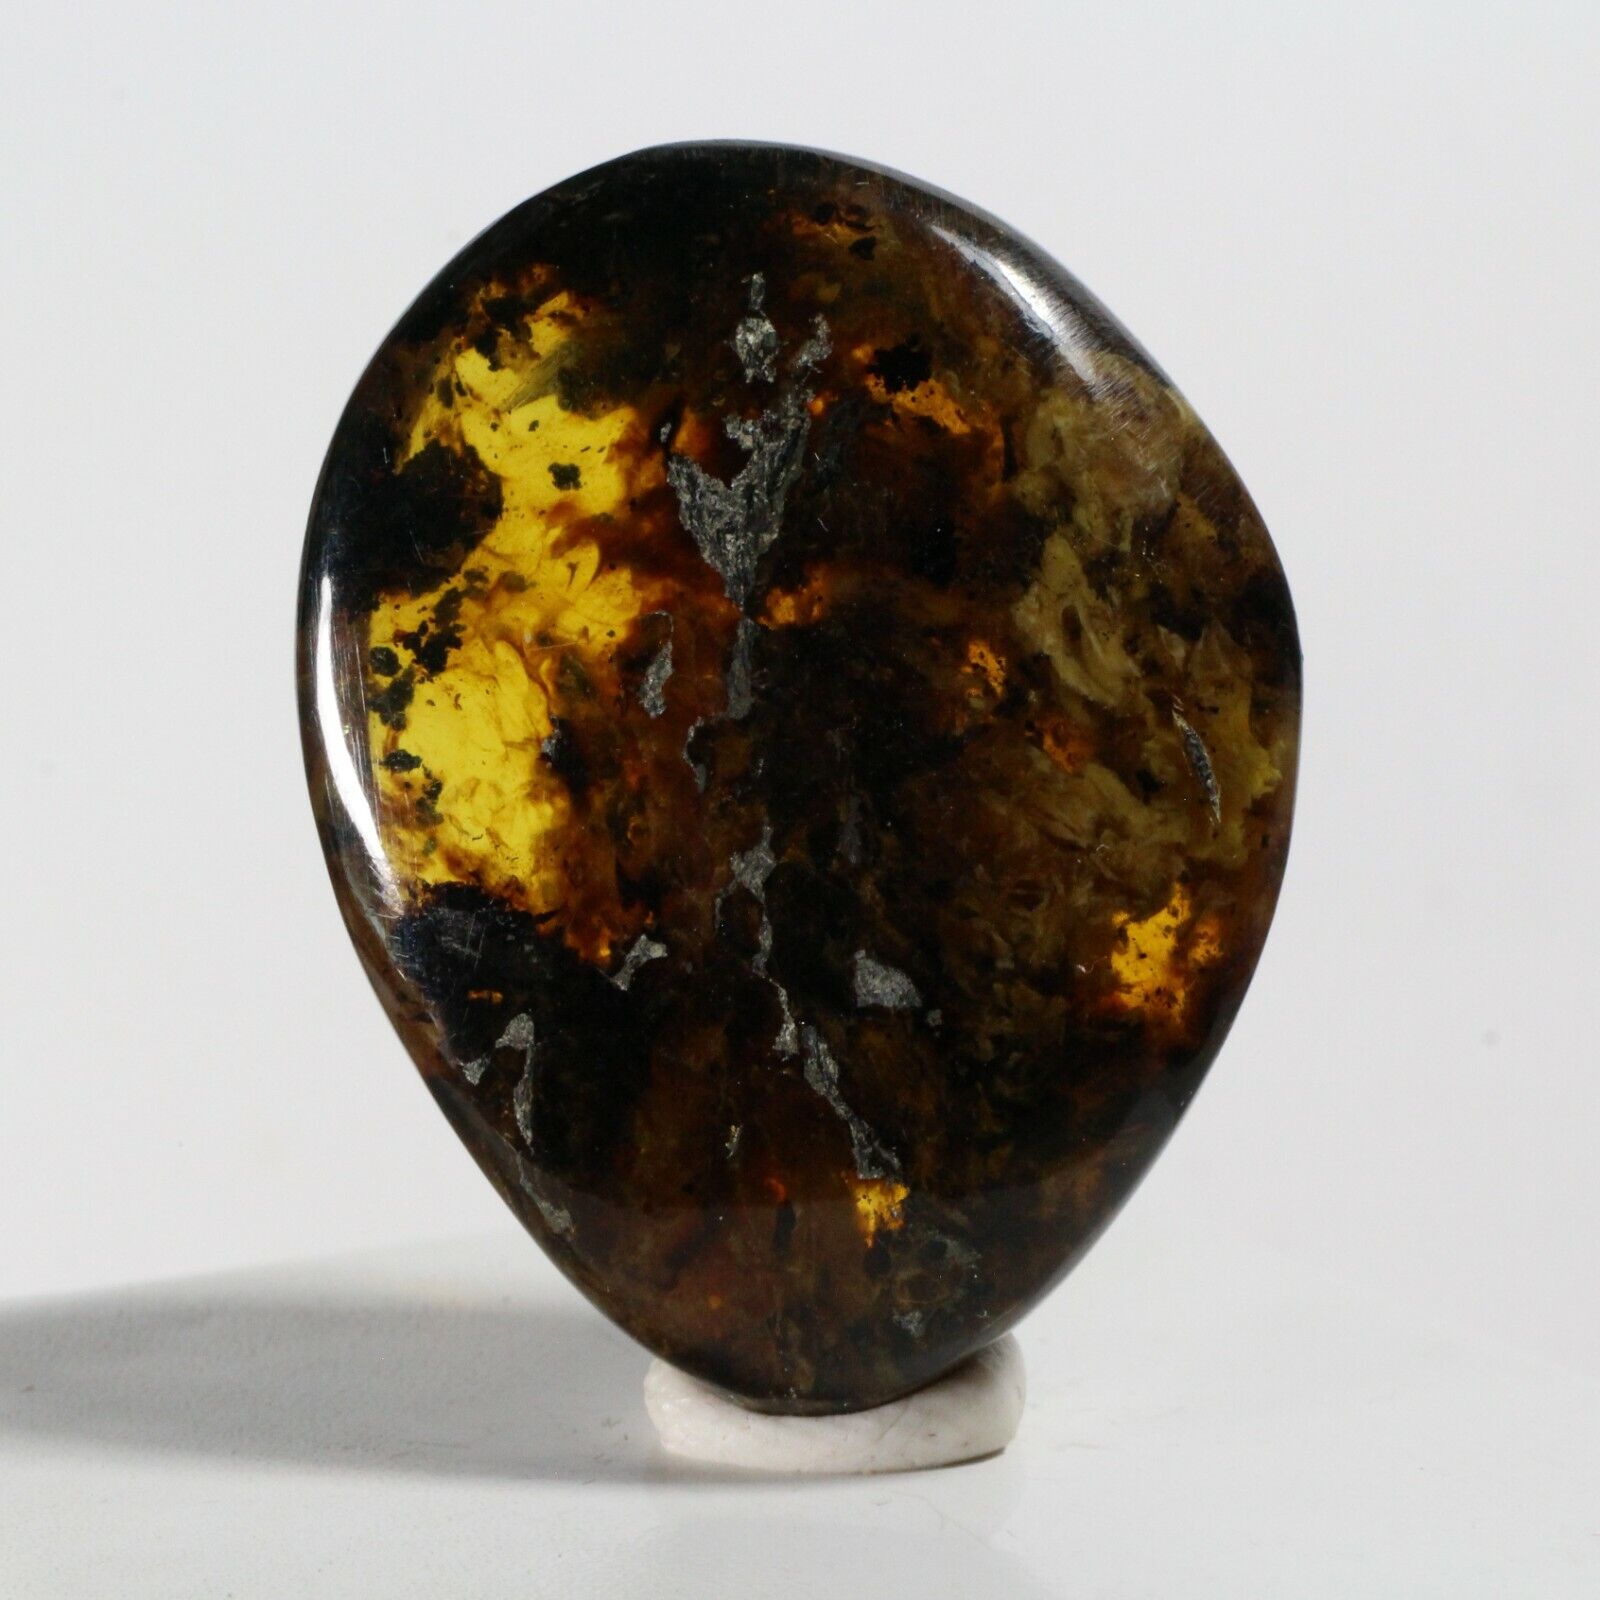 40ct Genuine Dominican Amber Fossil Cabochon Cab Crystal Maybe Blue or Green 02